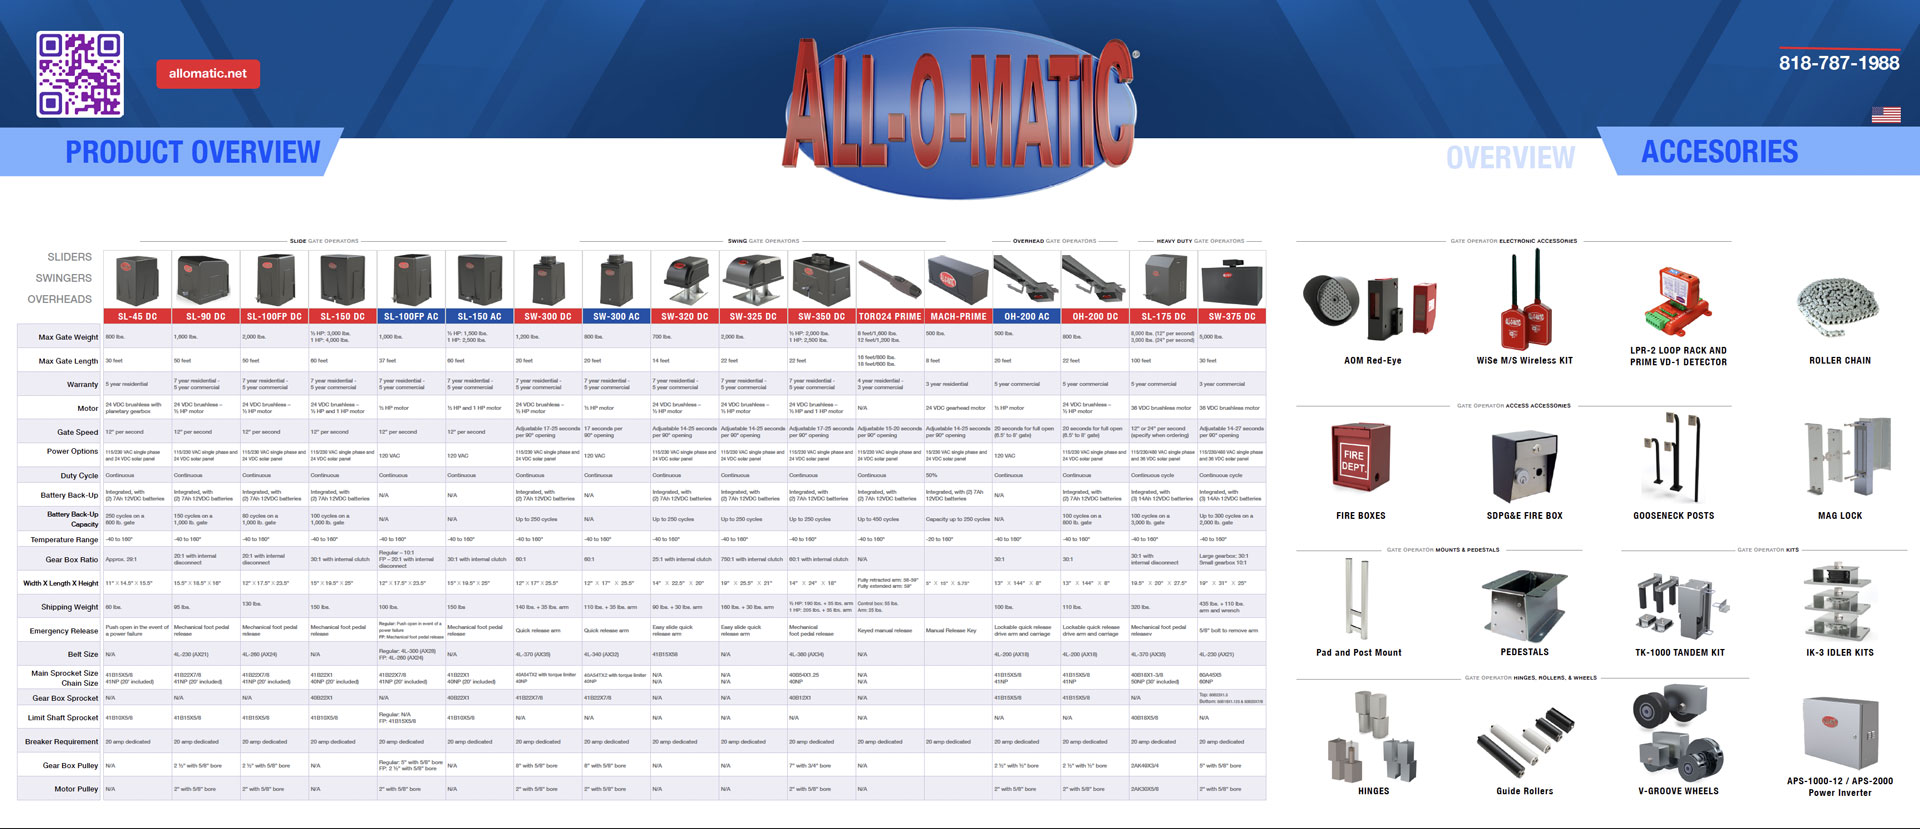 All-O-Matic Product Overview